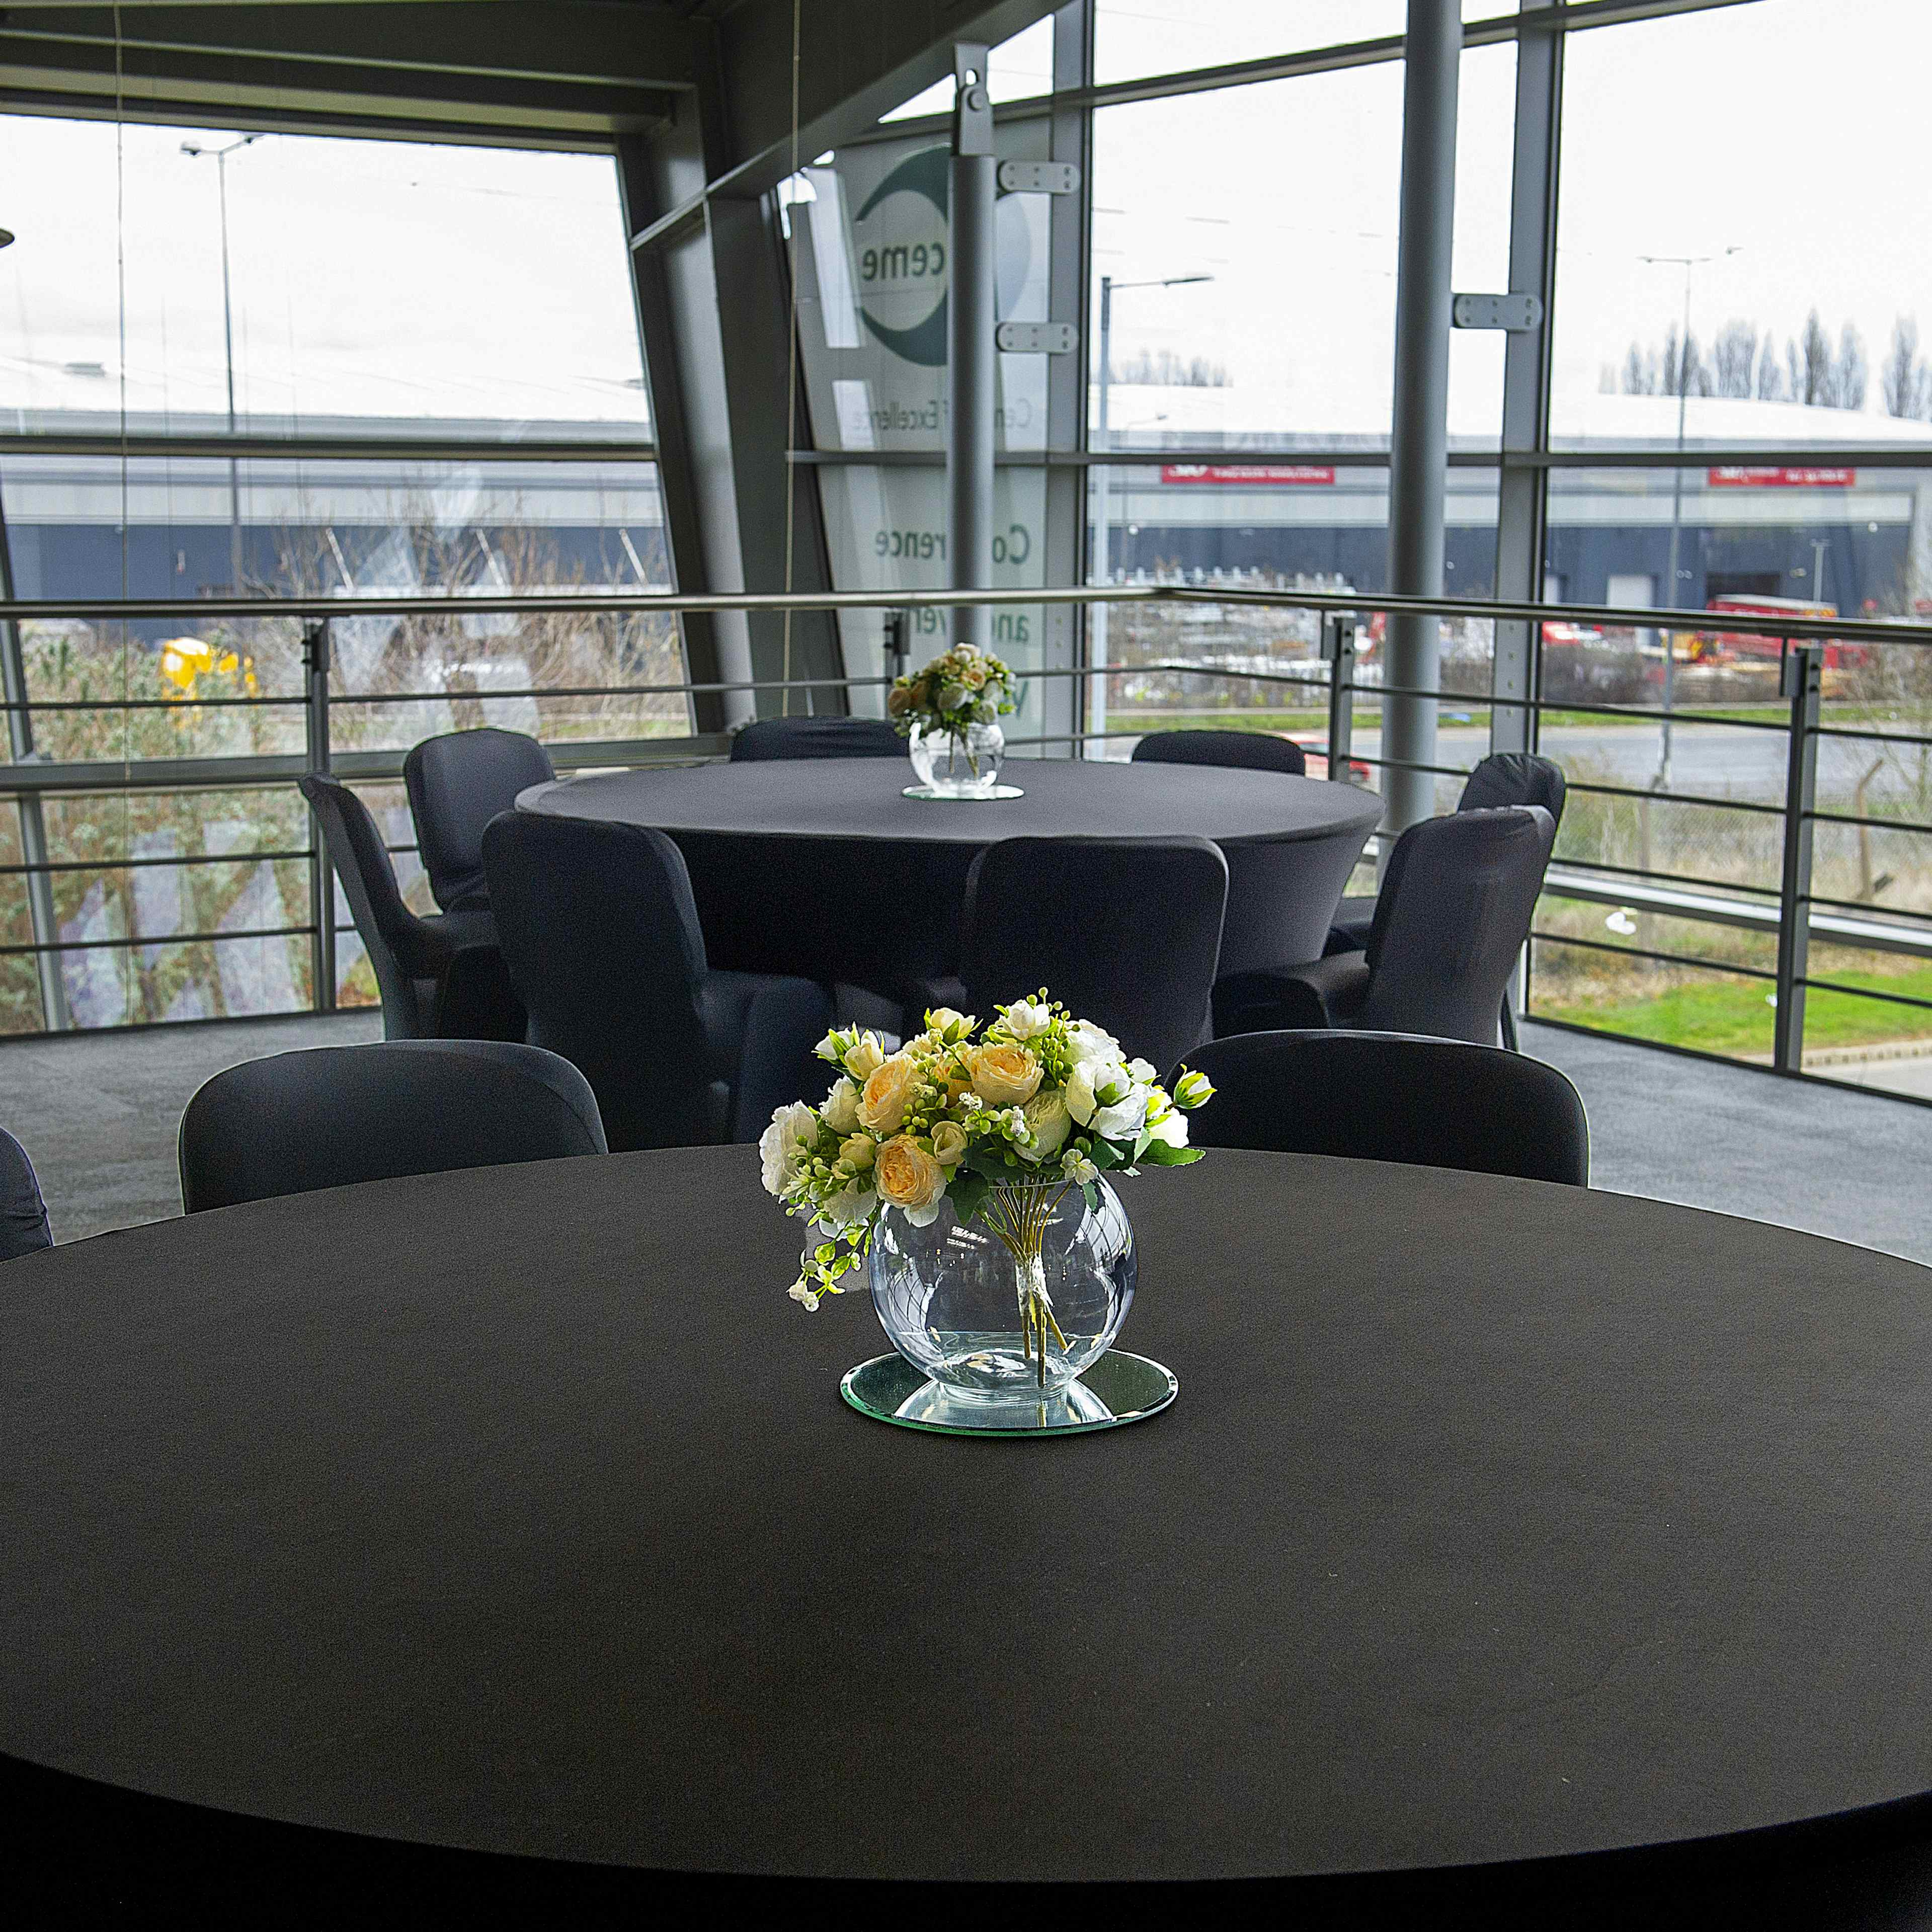 CEME Events Space - The Deck image 3